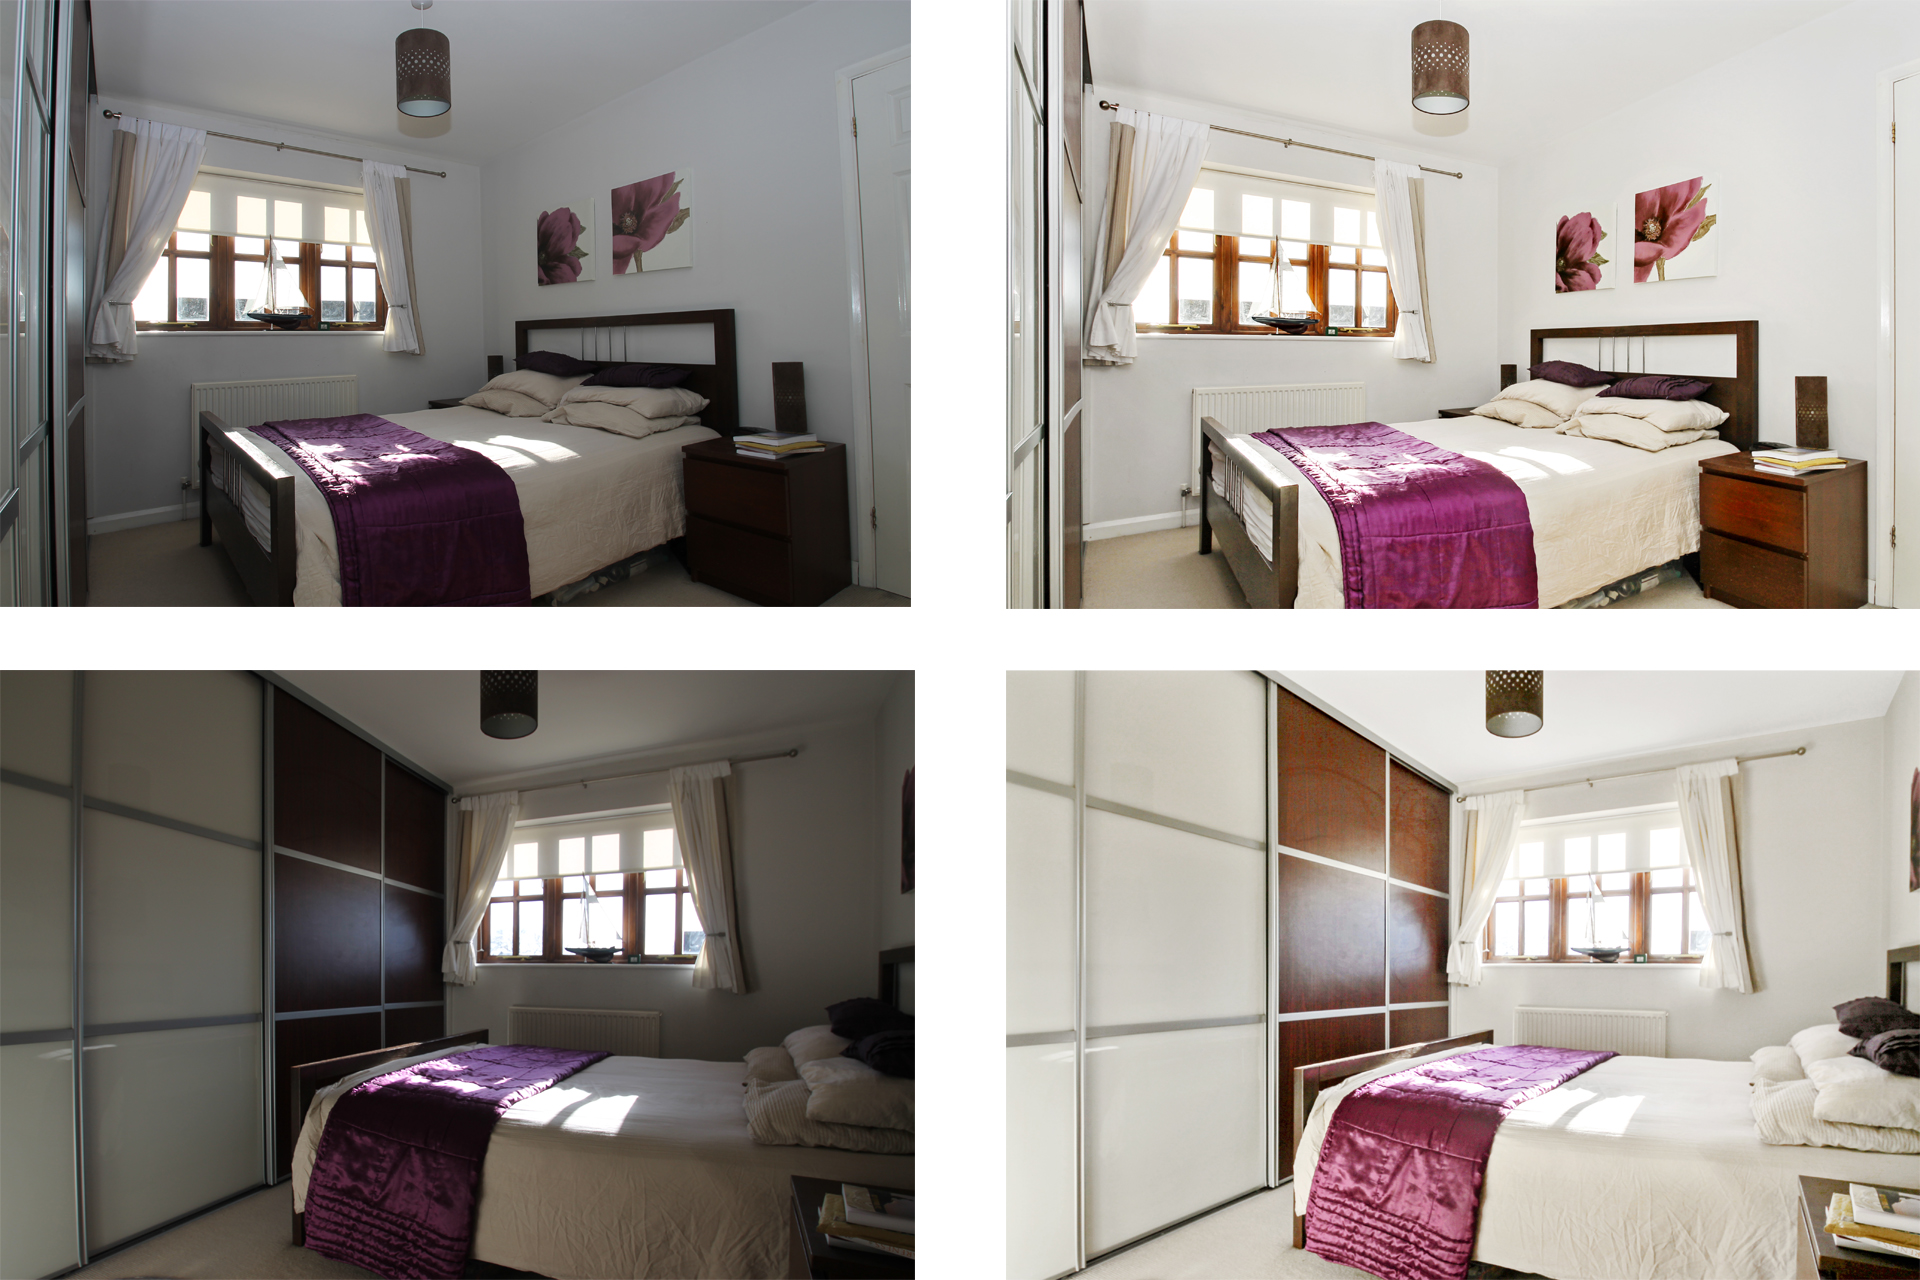 Real Estate Image Editing Services | 360 Image Stitching Services | Day to Night Photo Conversion